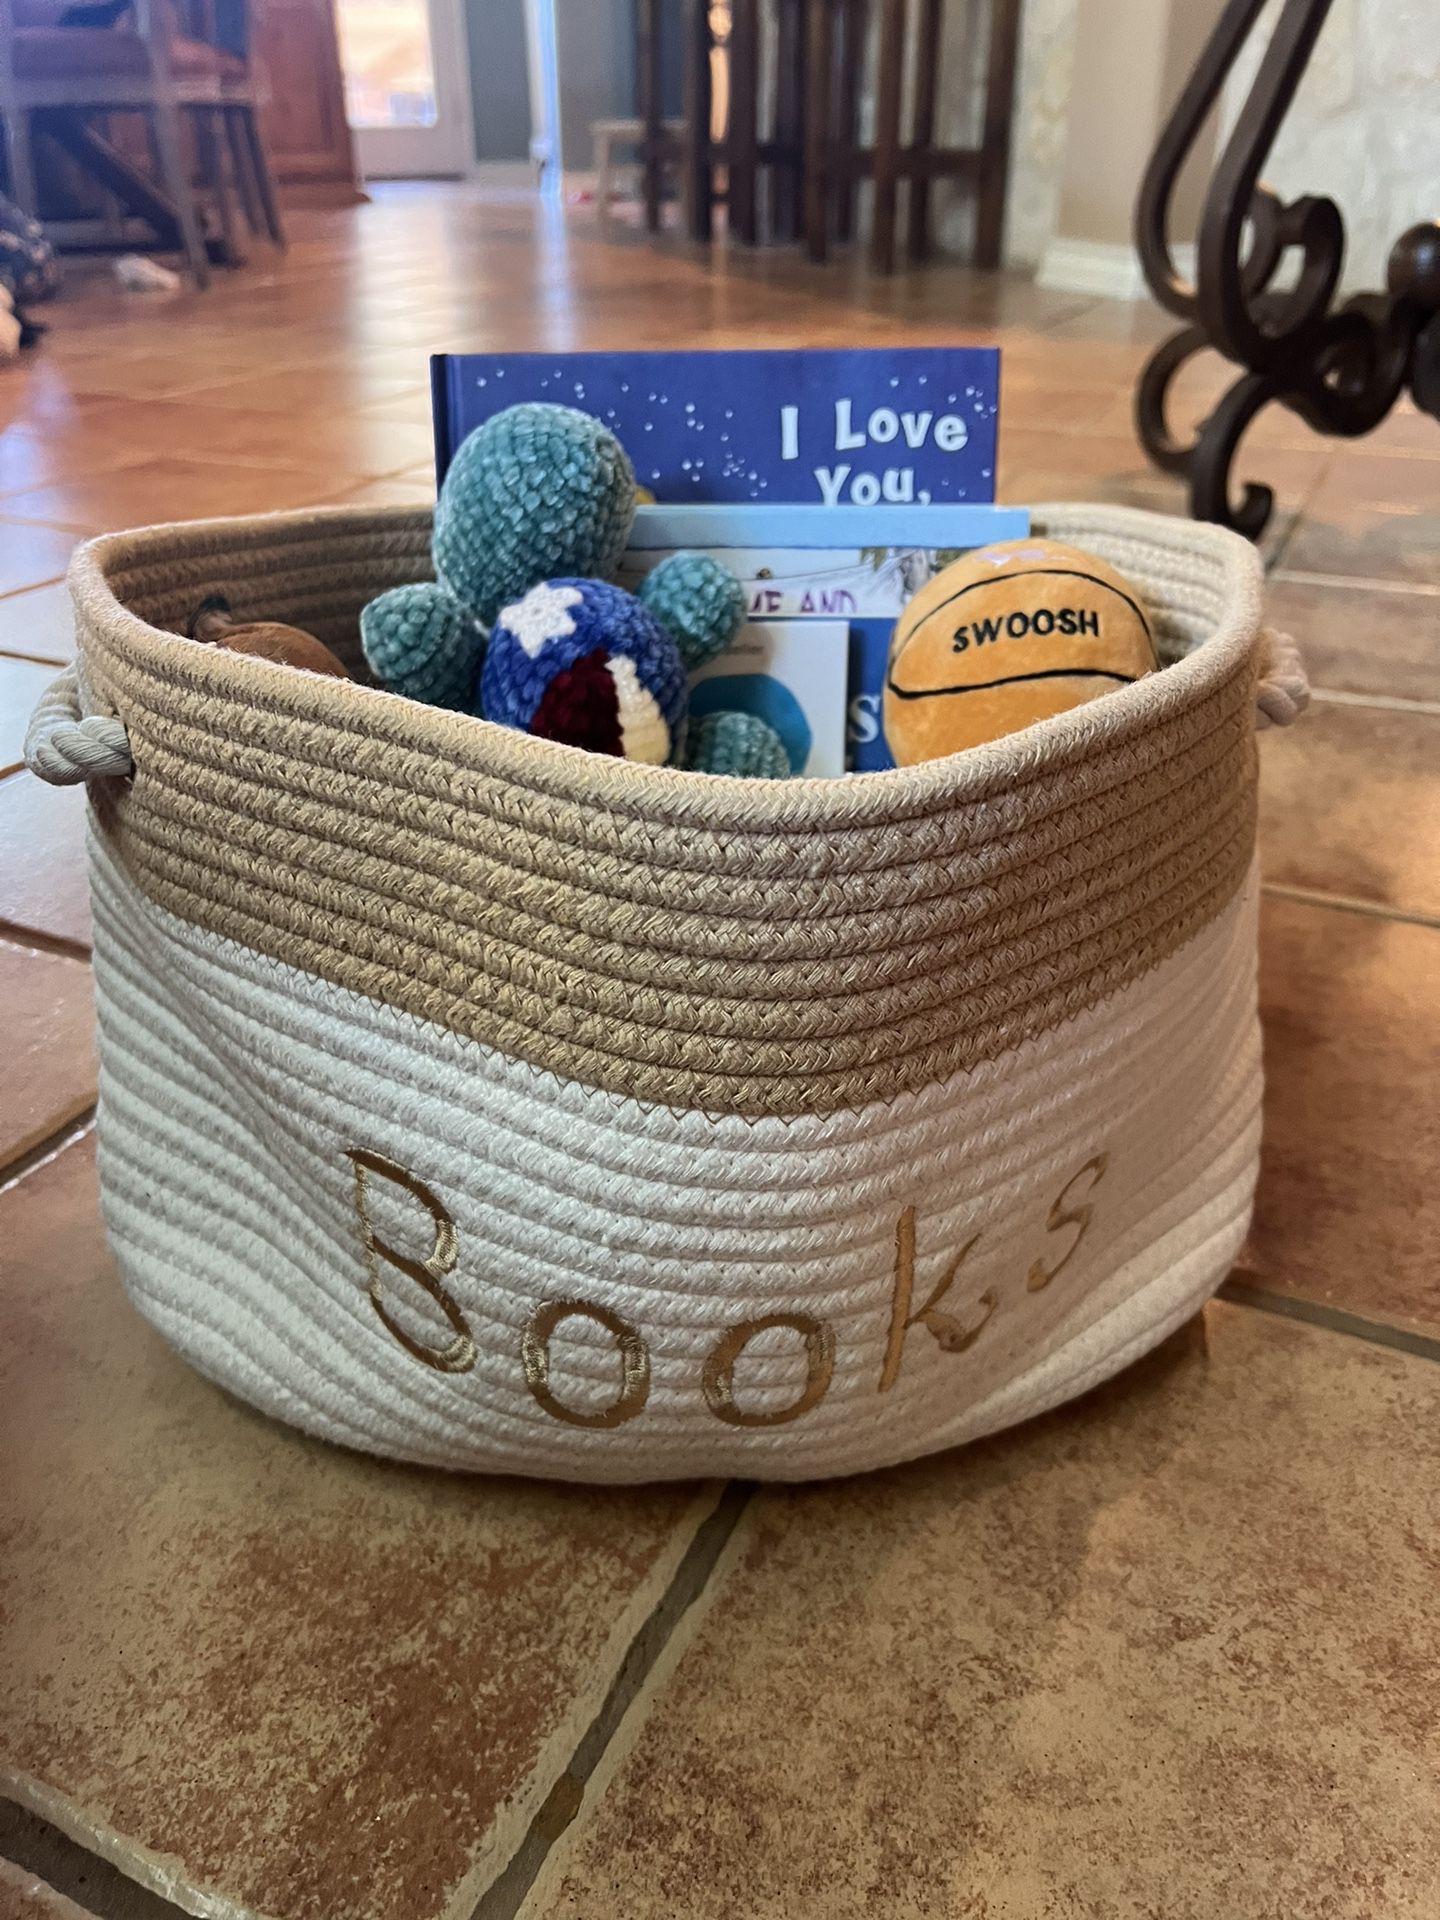 Kids Book Basket With Book Basket And Plush Toys Included!